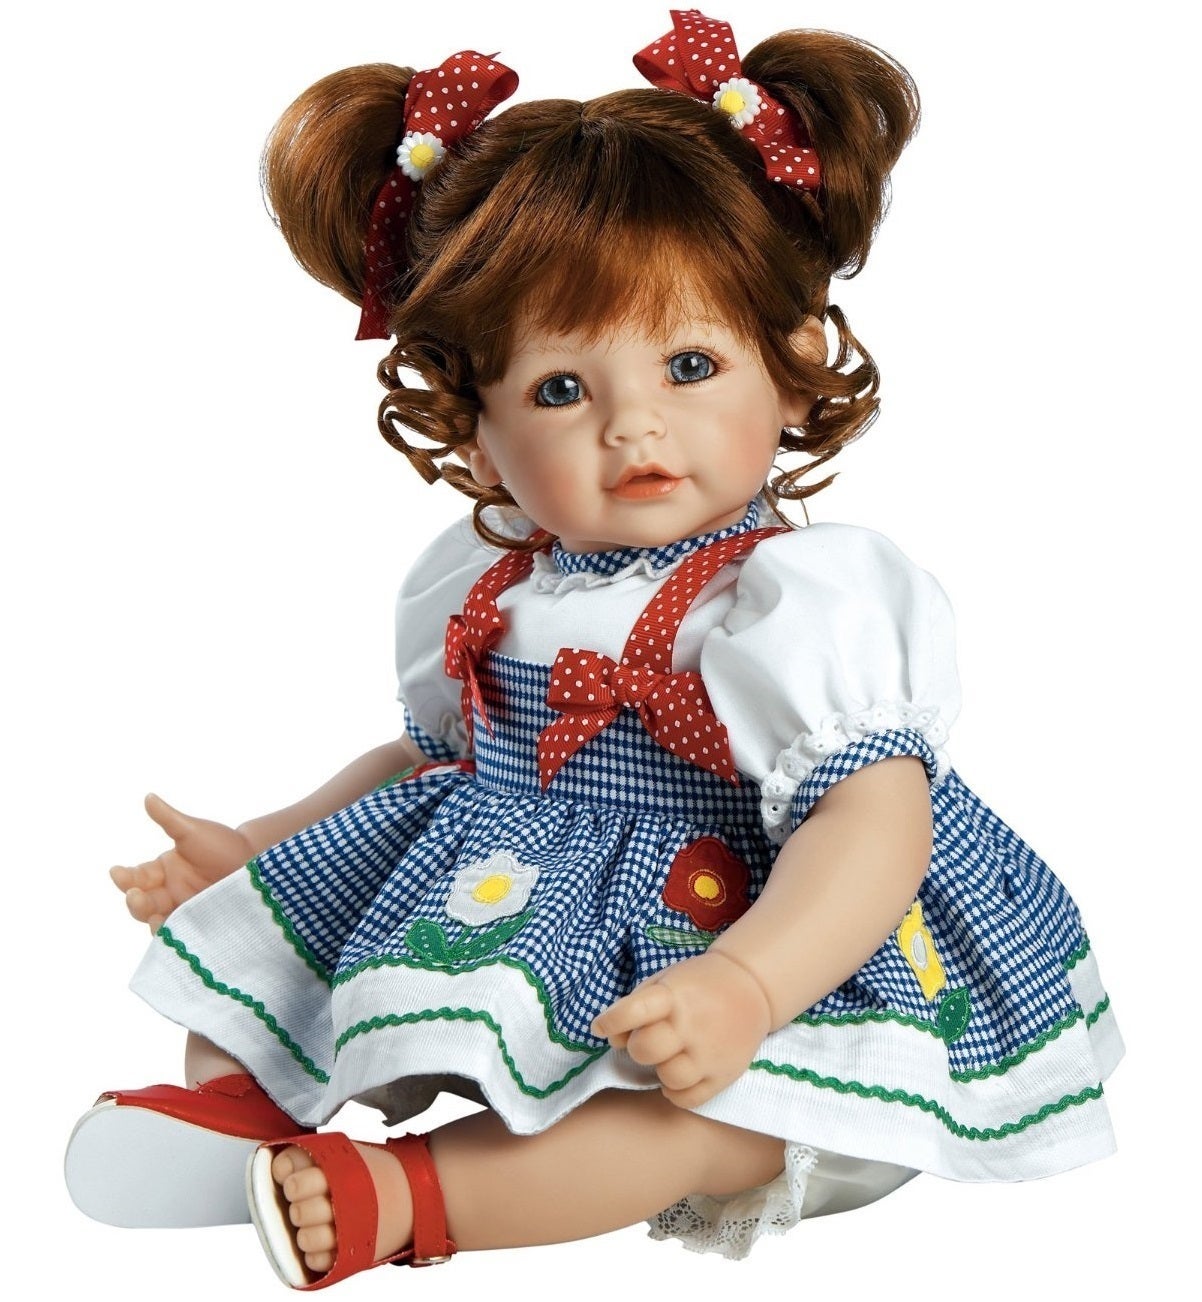 Adora Toddlertime Play Doll Daisy Delight in White | Toyco